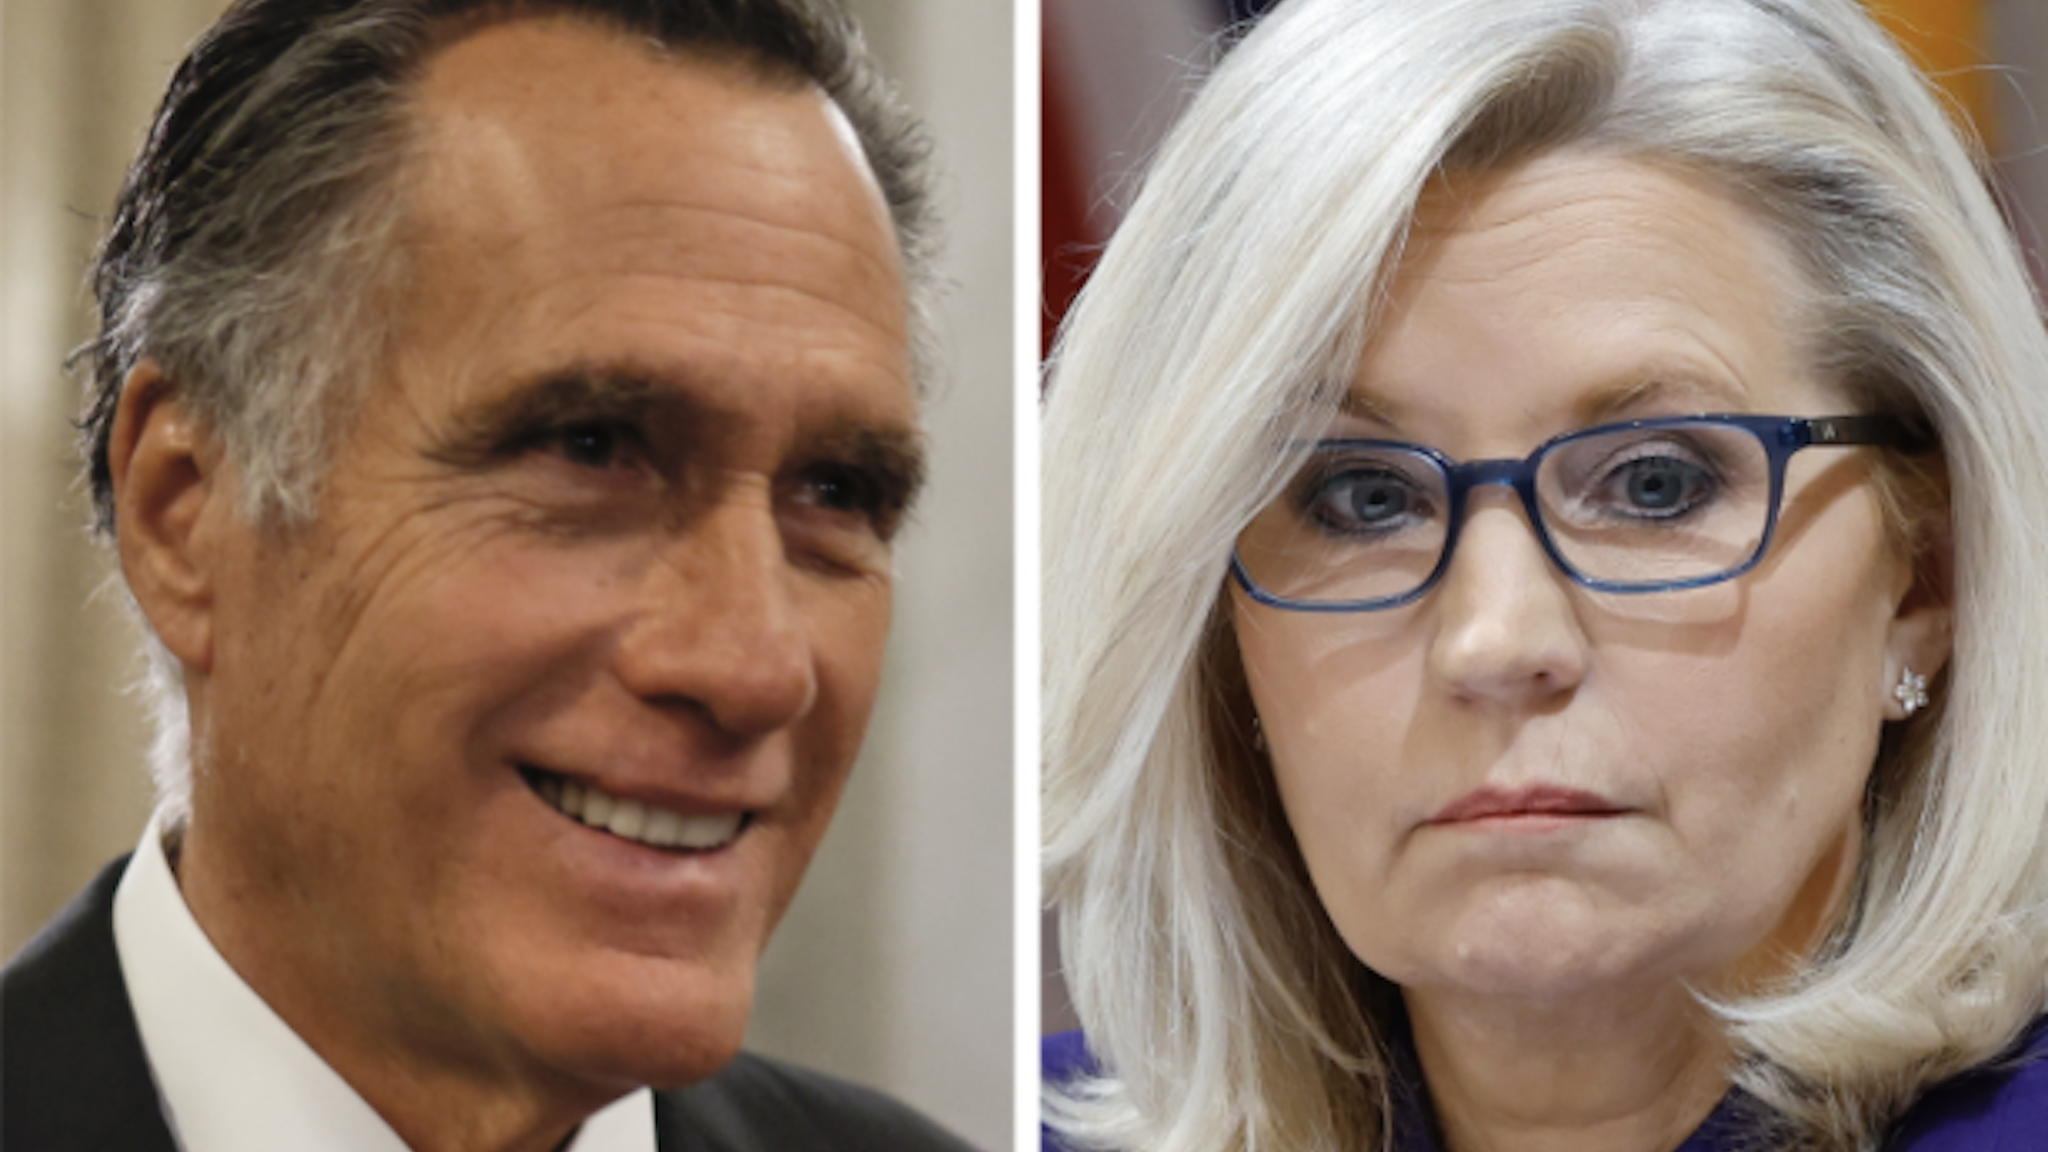 Utah and Wyoming sent so-called RINOs Mitt Romney and Liz Cheney to Washington, but also put moderate Republicans in their statehouses